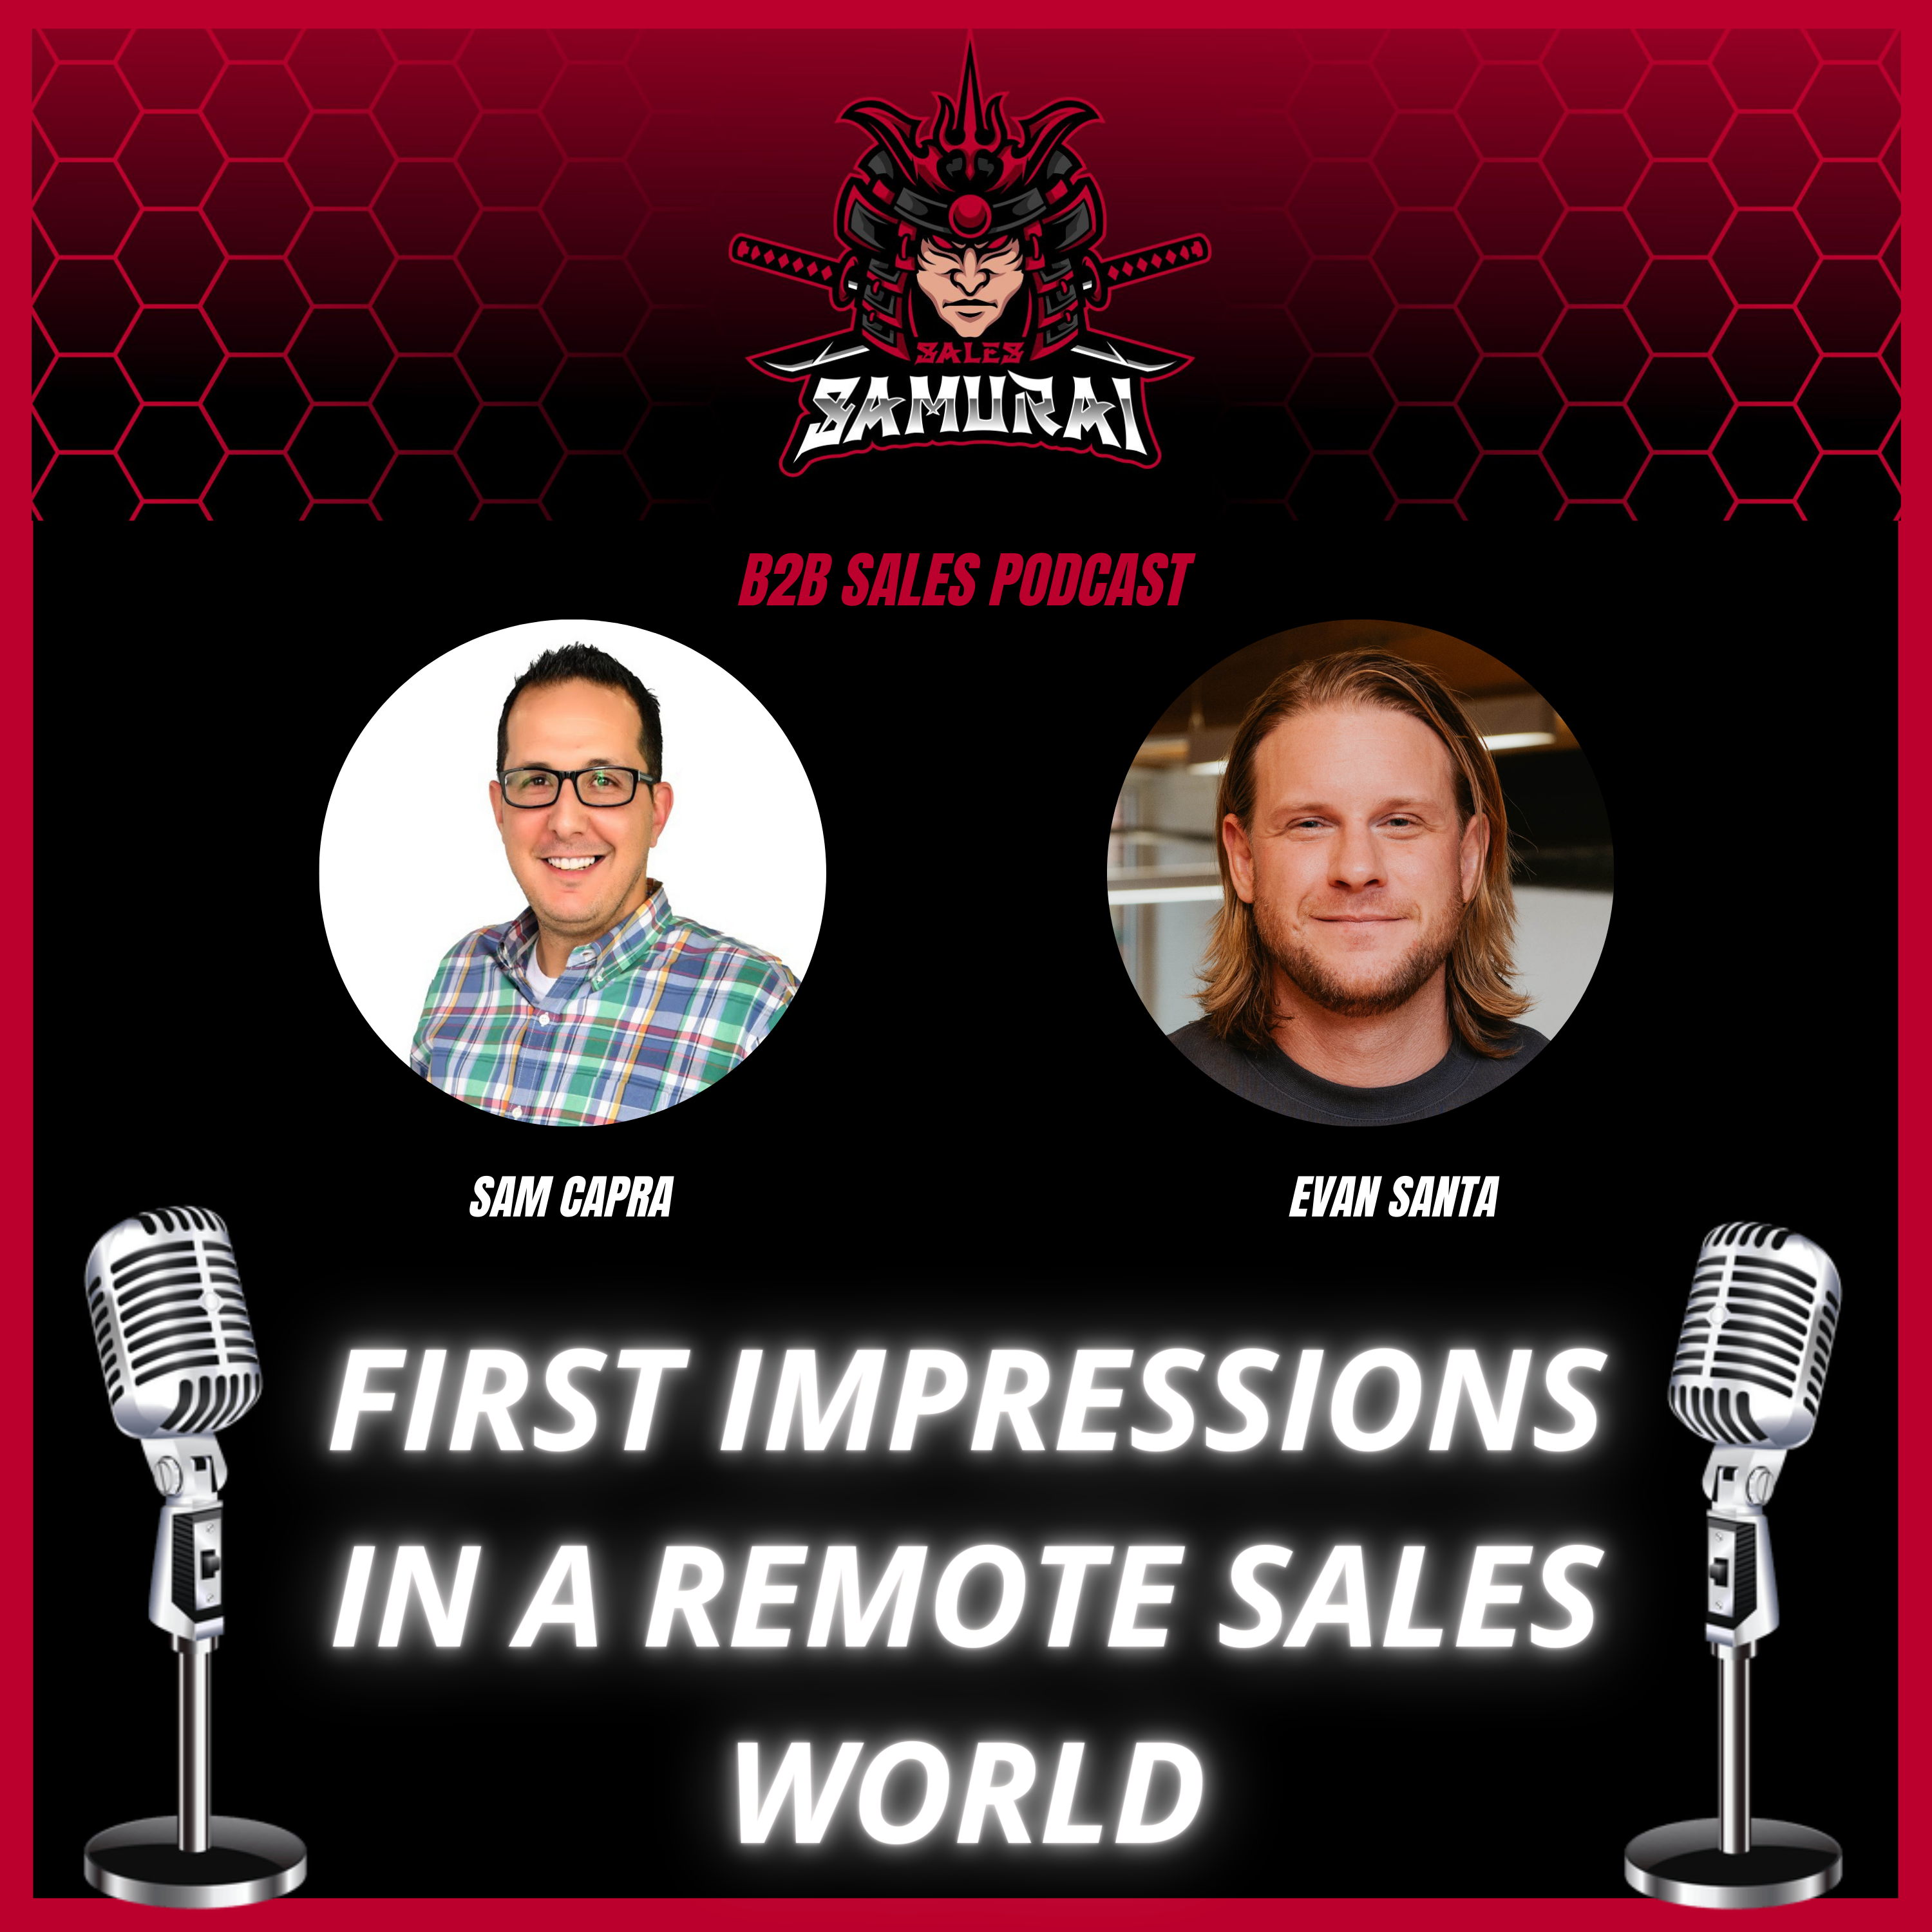 First Impression in a Remote Sales World